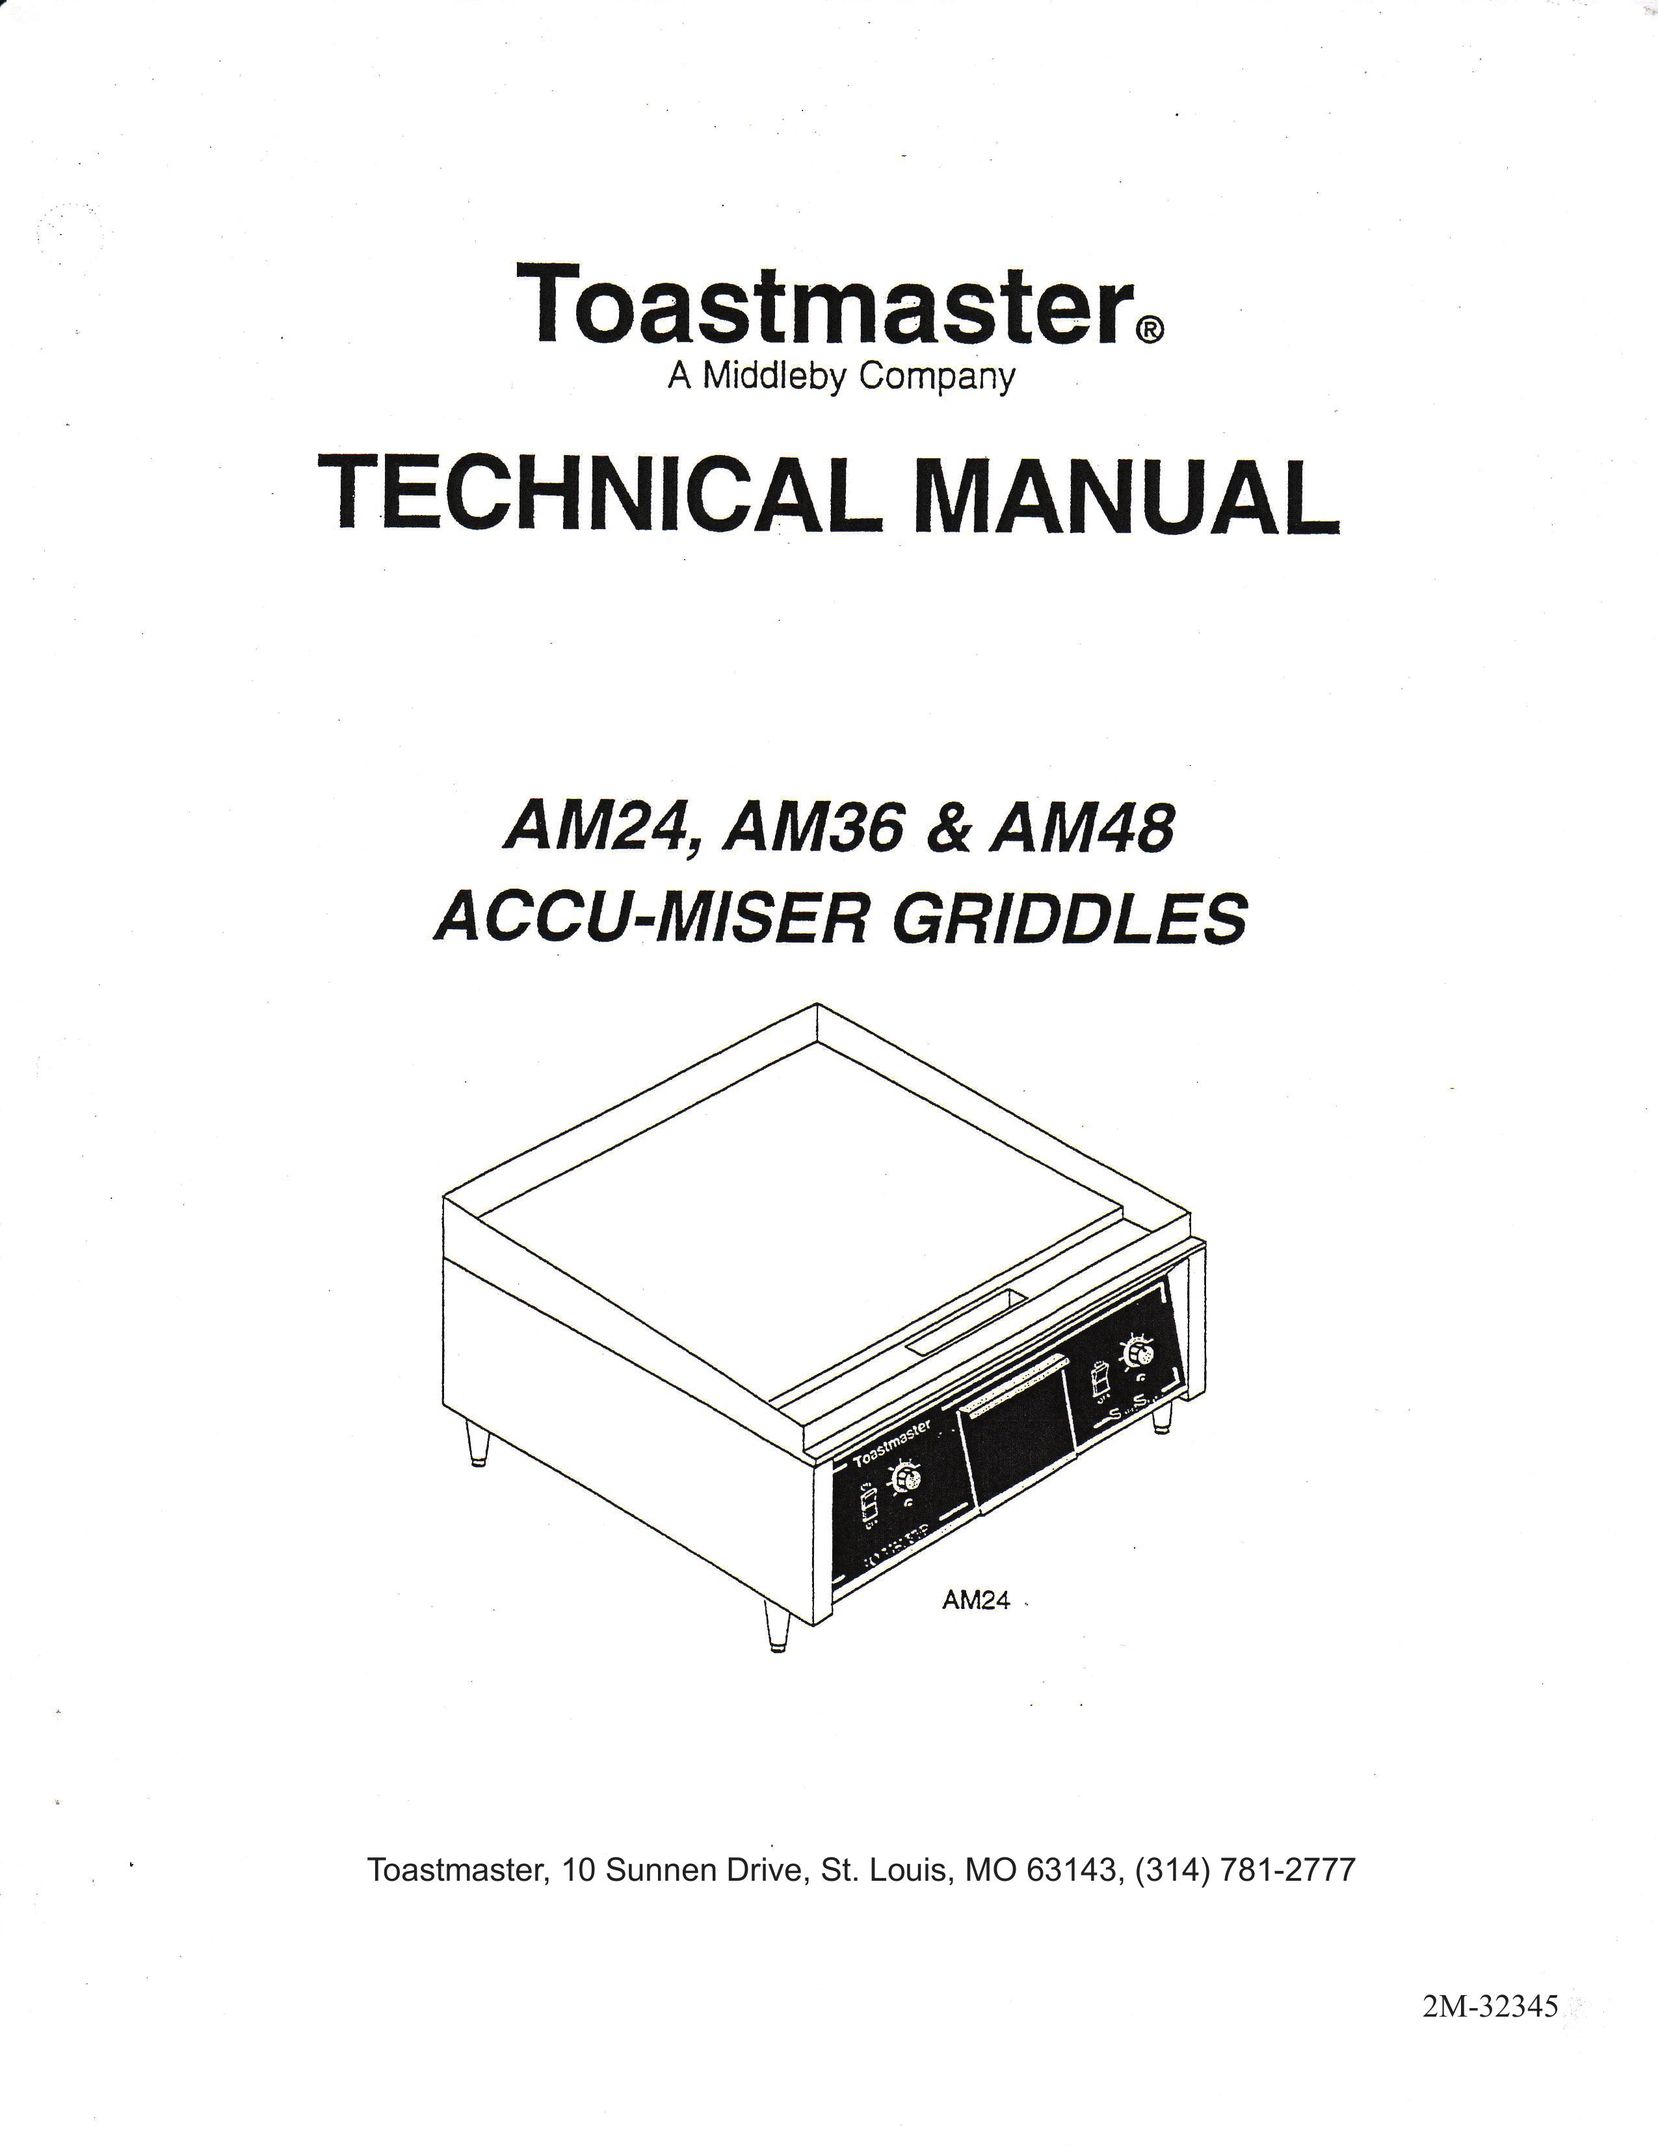 Toastmaster AM36 Cooktop User Manual